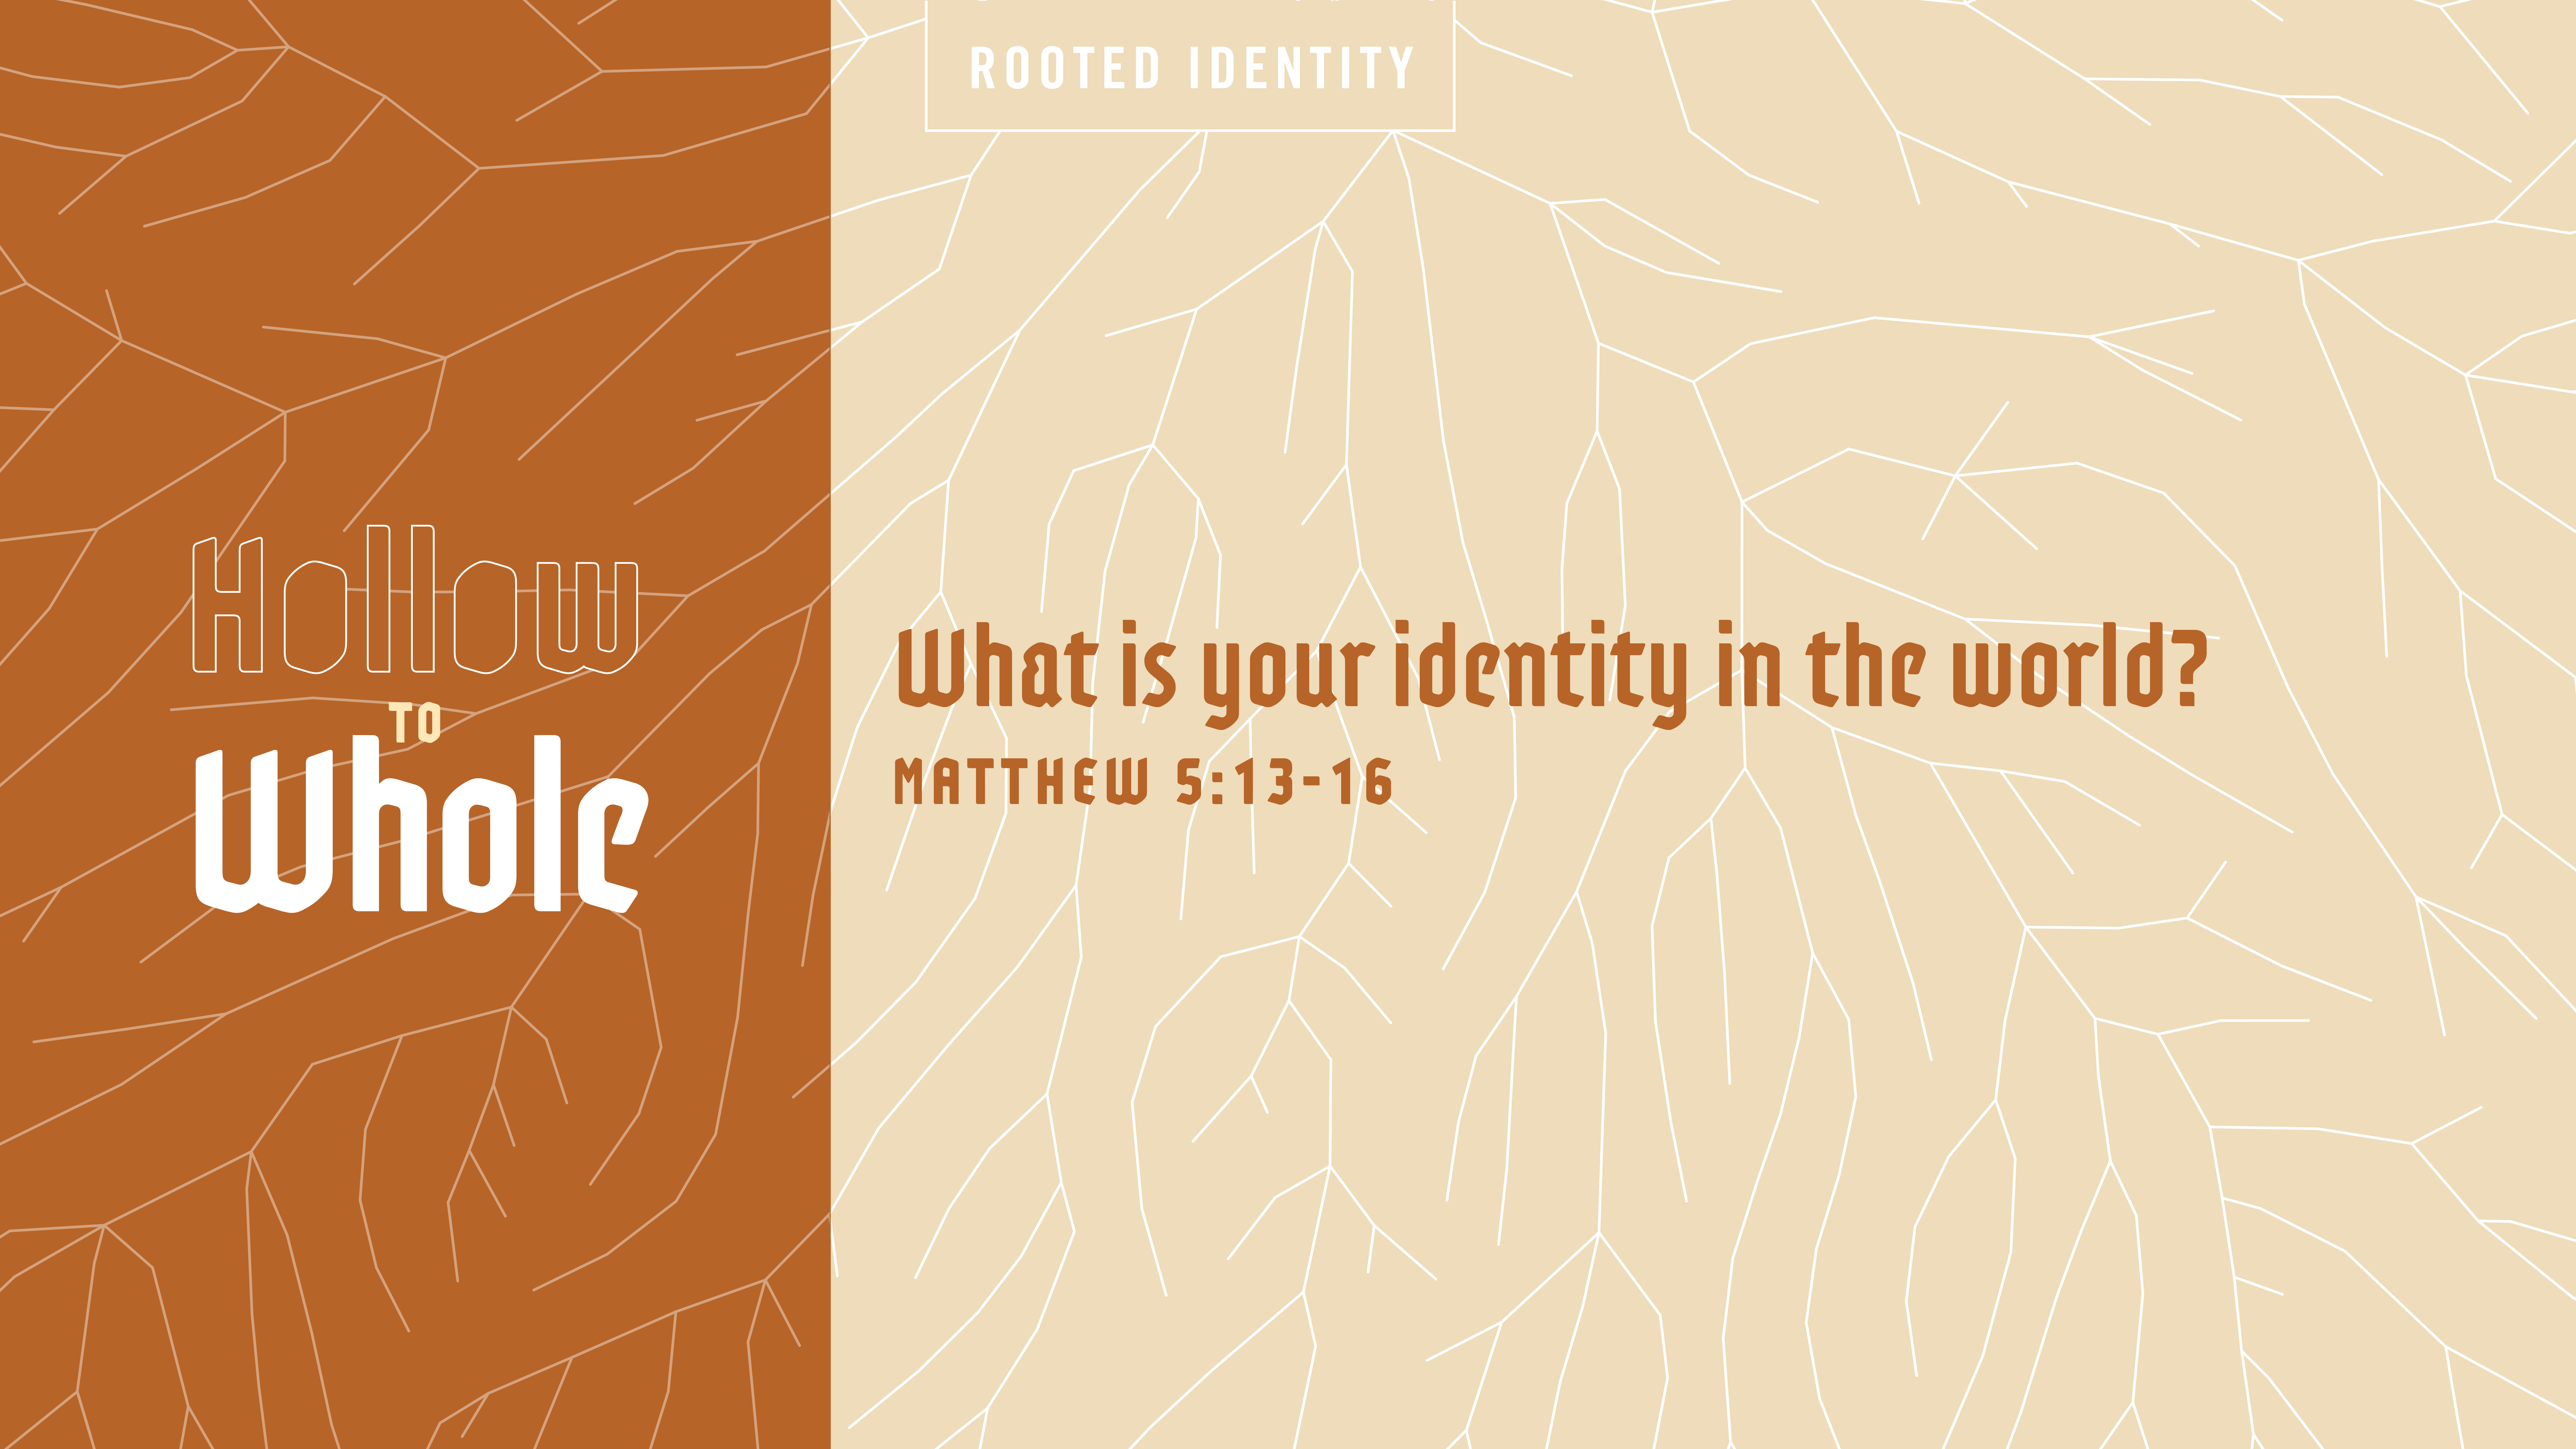 What is your identity in the world?